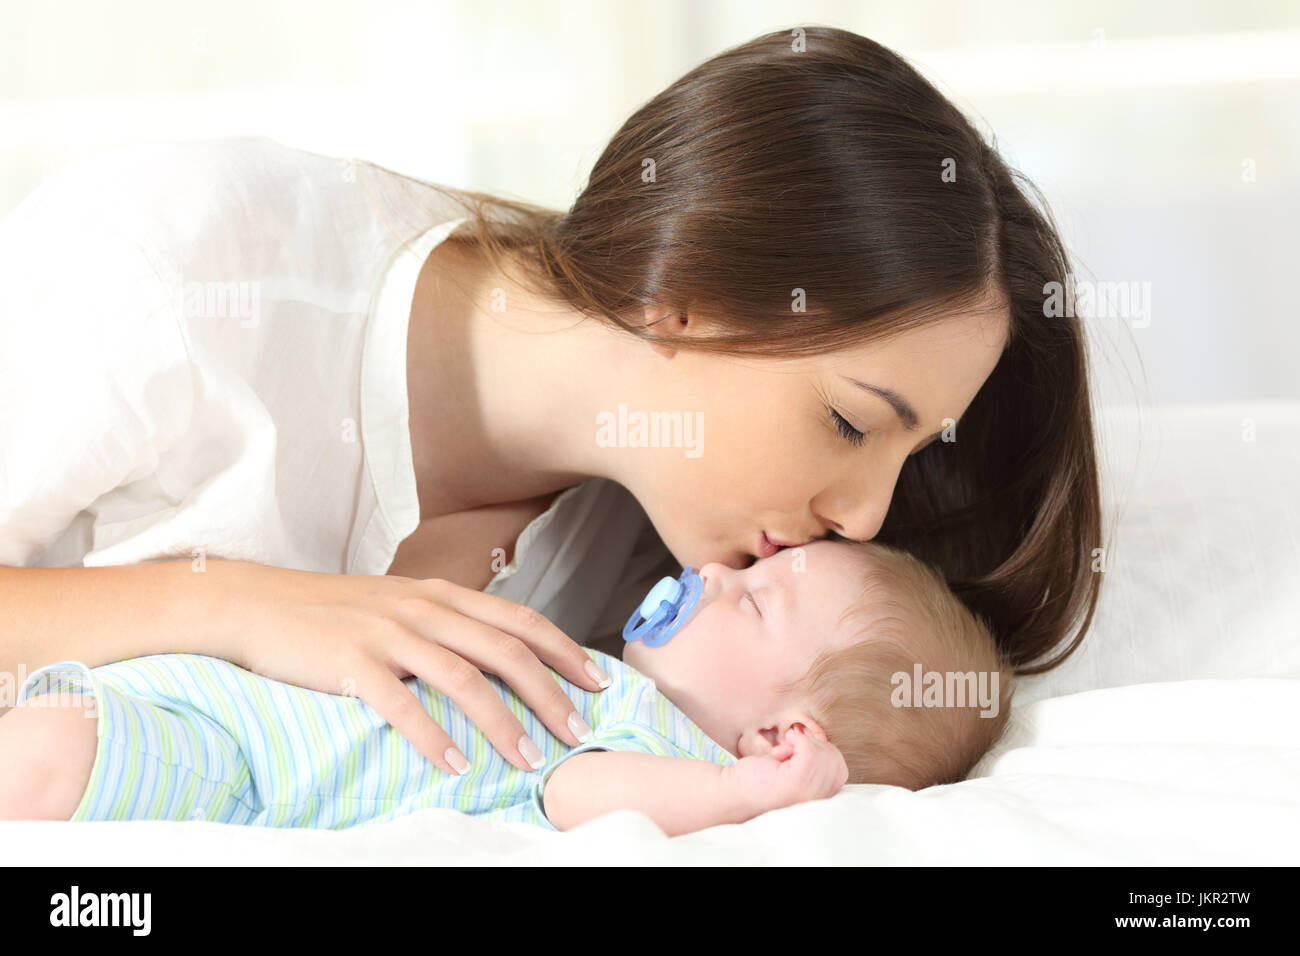 Side view portrait of an affectionate mother kissing her baby sleeping on a bed Stock Photo